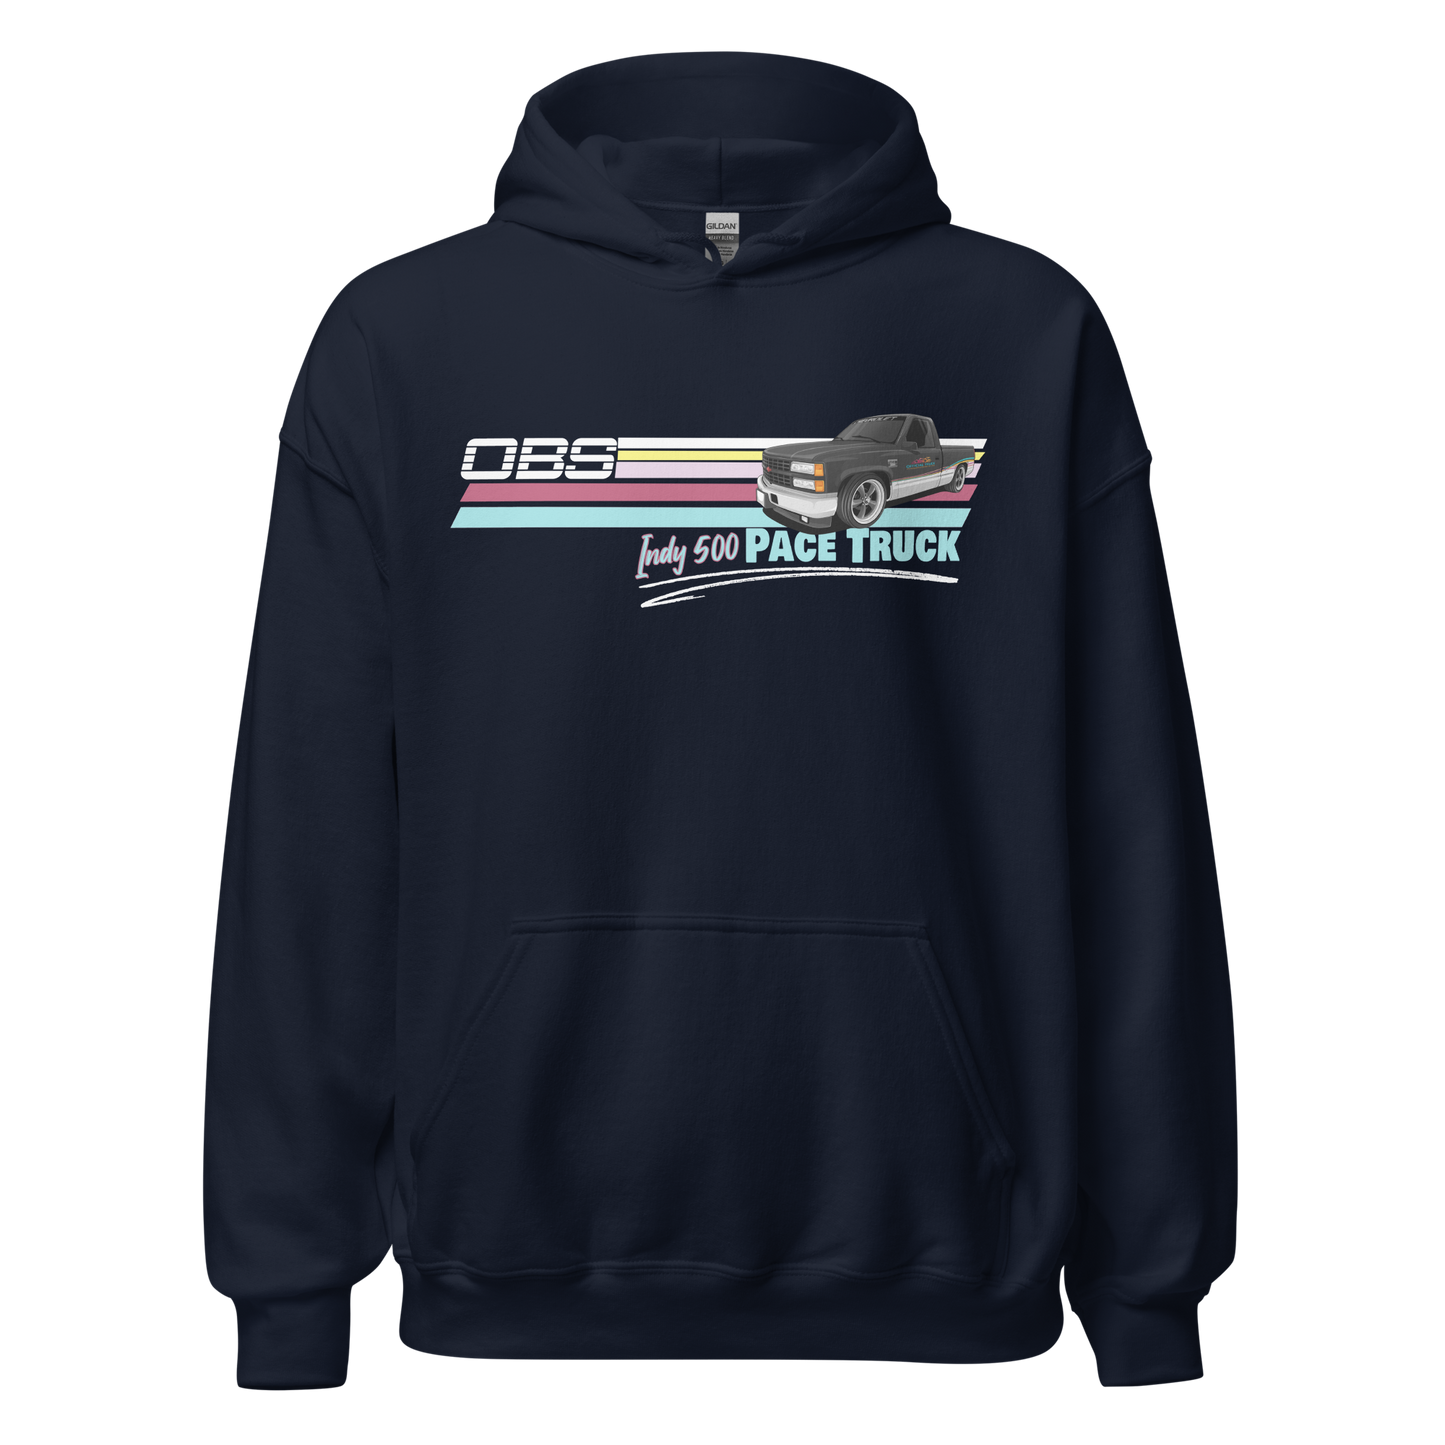 OBS Chevrolet 1993 Indy 500 Pace Truck Unisex Hoodie